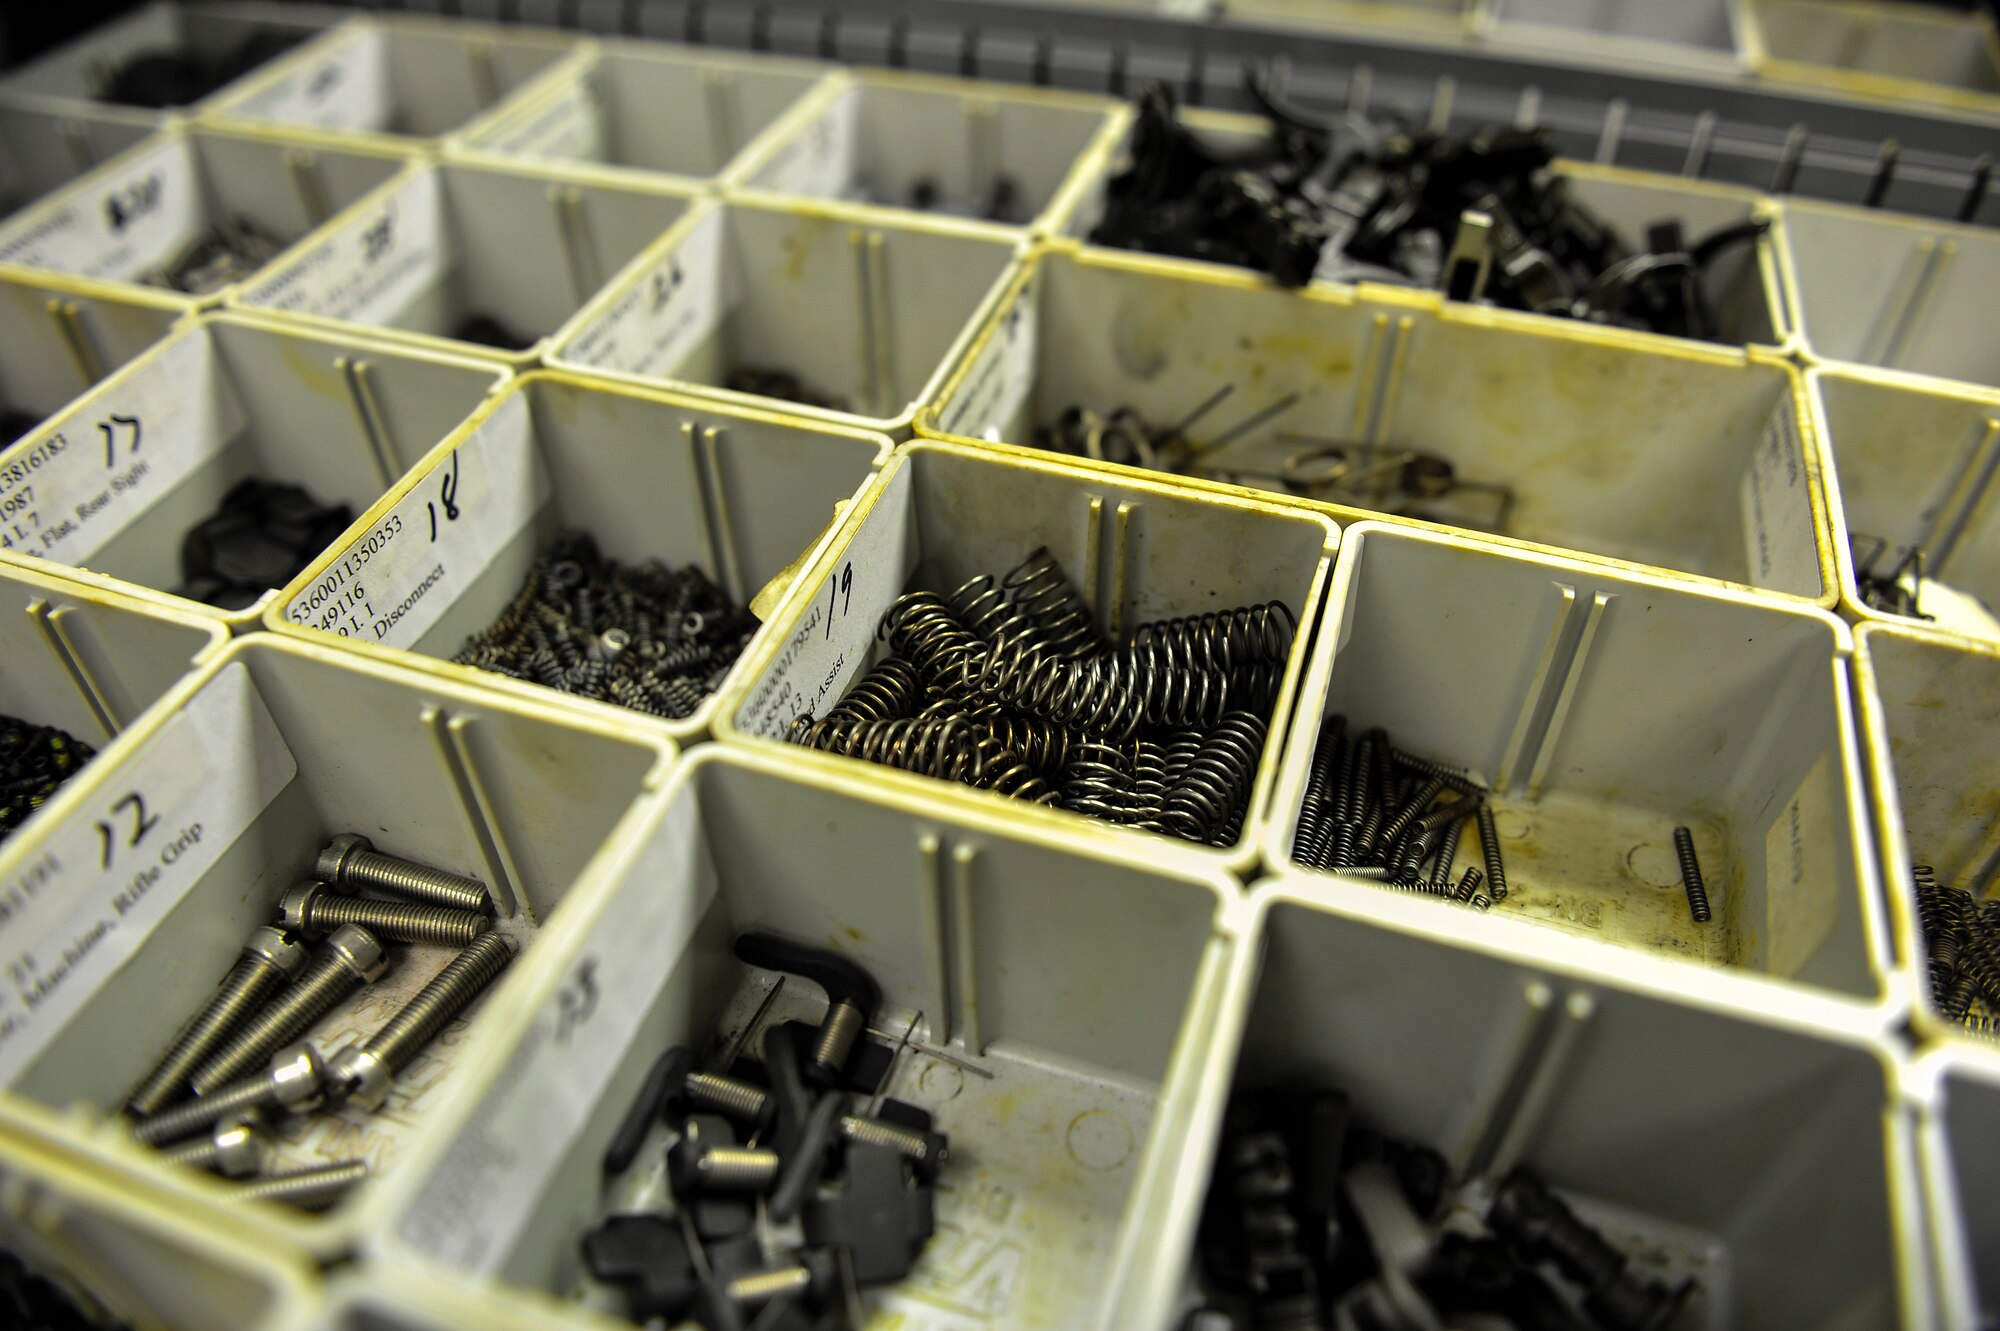 Sort M4 rifle replacement parts sit on a table at the firing range on Hurlburt Field, Fla., December 2, 2014. CATM instructors provide firing training and maintain all weapons used by CATM and Security Forces. (U.S. Air Force photo/Airman 1st Class Jeff Parkinson)